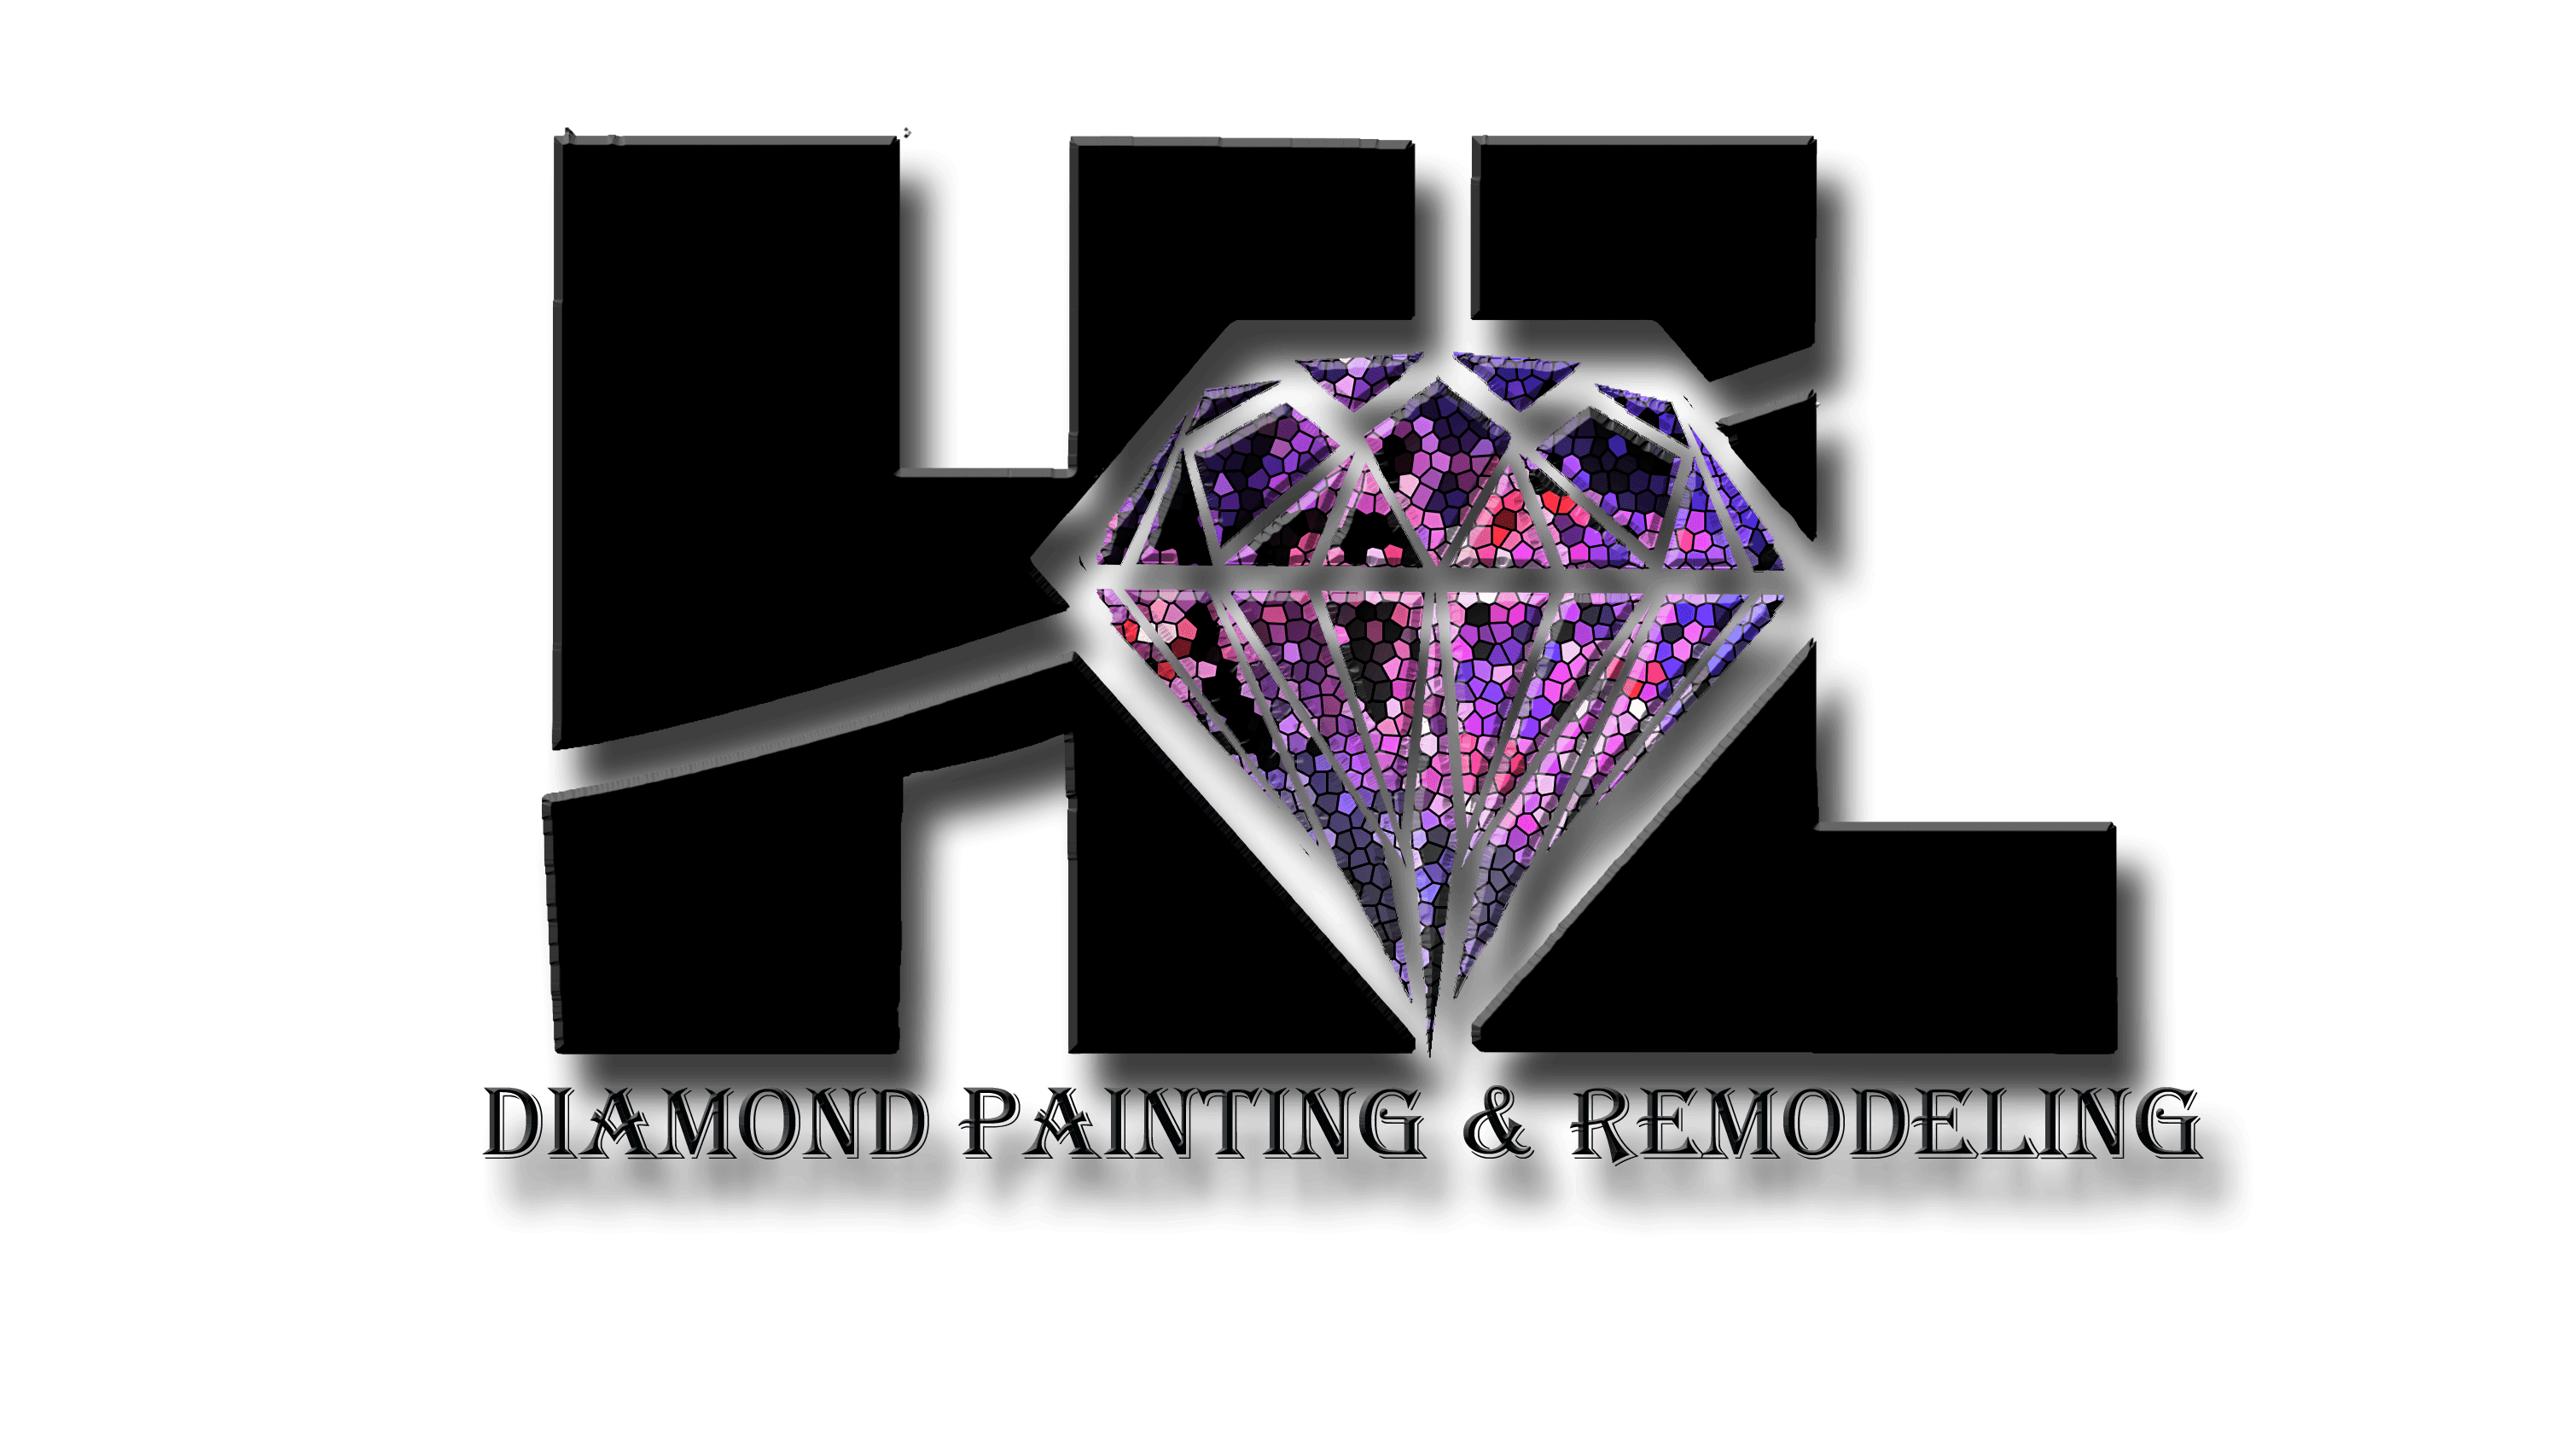 HL Diamond Painting &  Remodeling